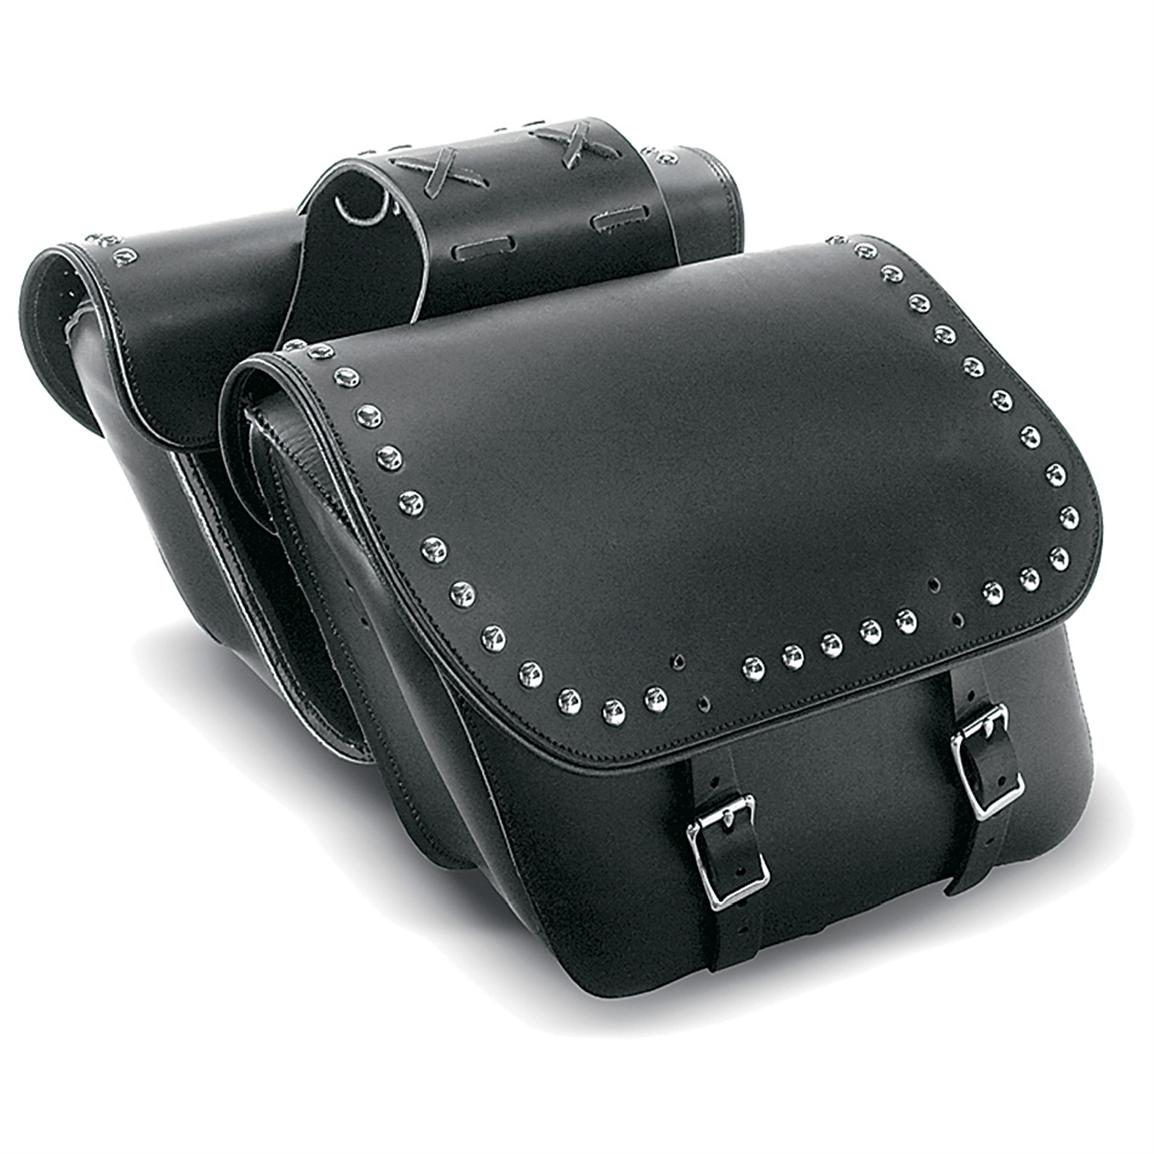 Carroll® Large leather Motorcycle Saddlebags - 149664, Racks & Bags at Sportsman's Guide